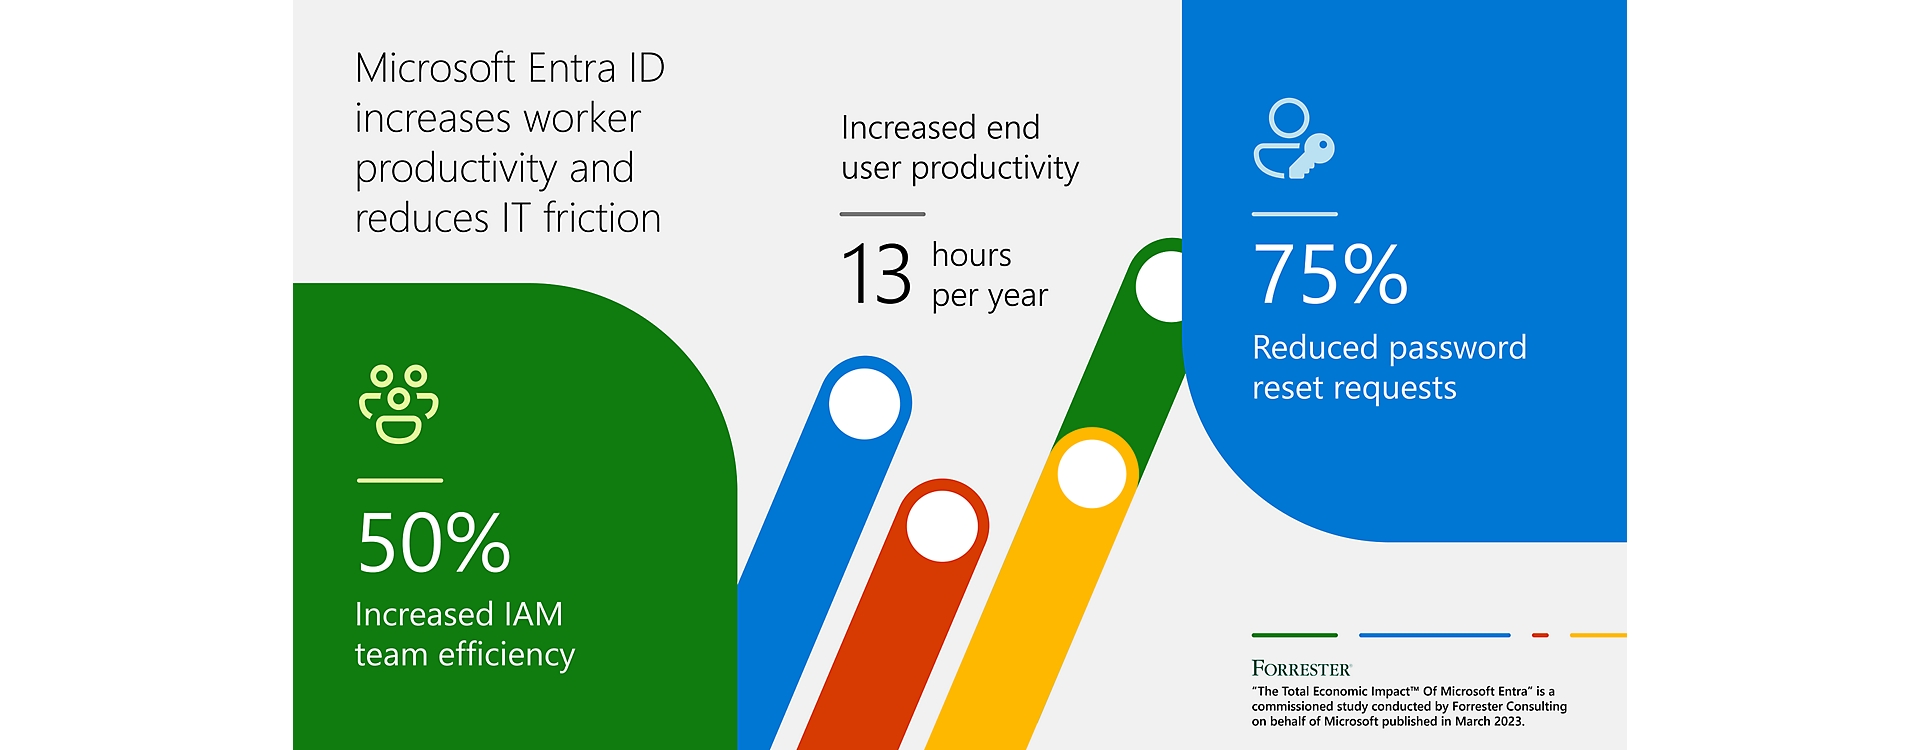 Microsoft Entra ID increases worker productivity and reduces IT friction. Fifty percent of teams increased identity and access management team efficiency. End–user productivity increased by 13 hours per year and password reset requests decreased by 75 percent.